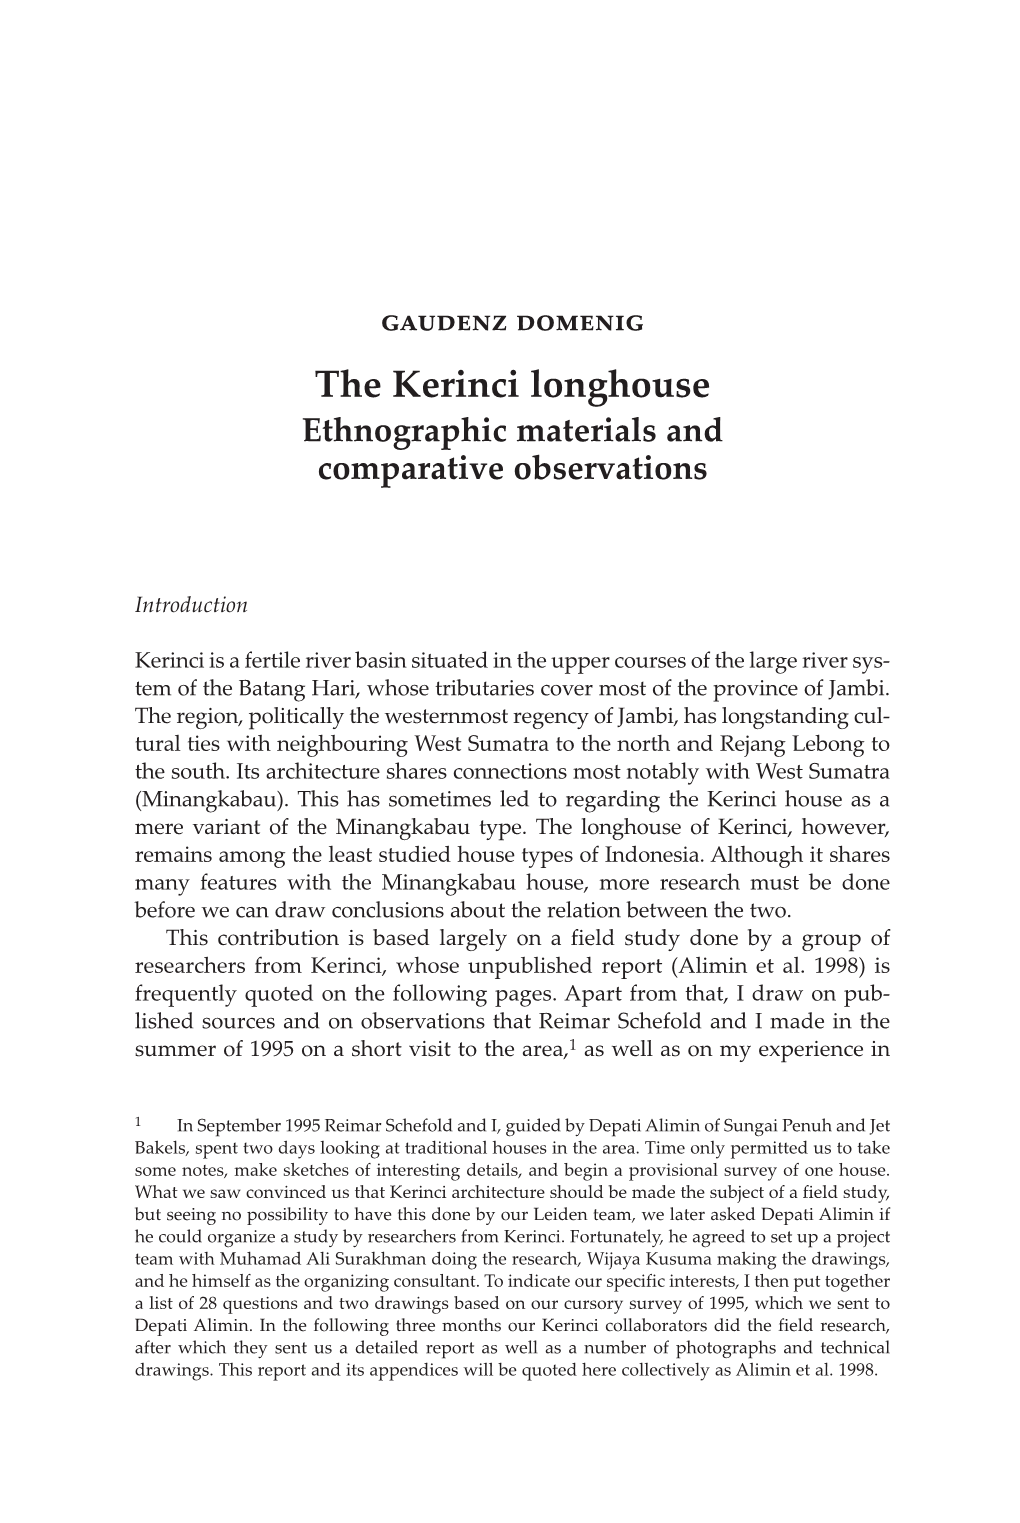 The Kerinci Longhouse Ethnographic Materials and Comparative Observations